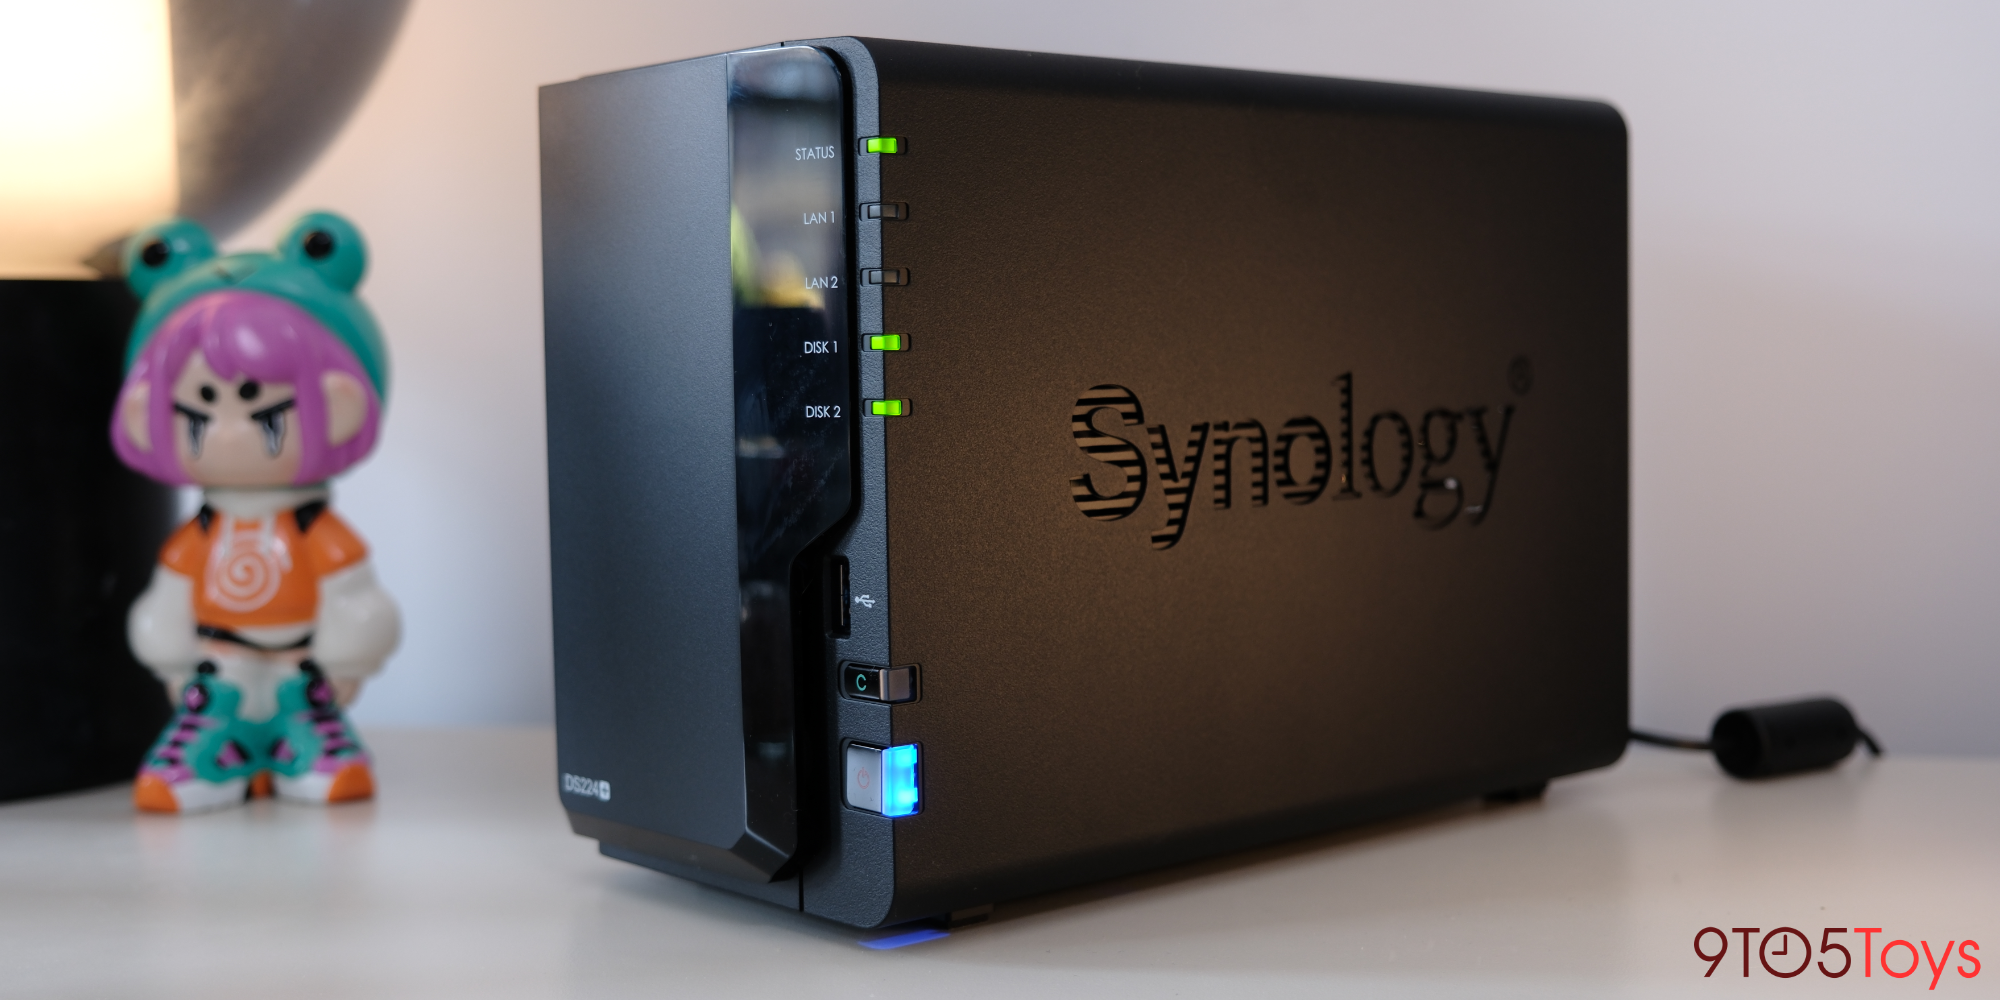 Review: Synology DS220+ NAS - Sleek Home Storage